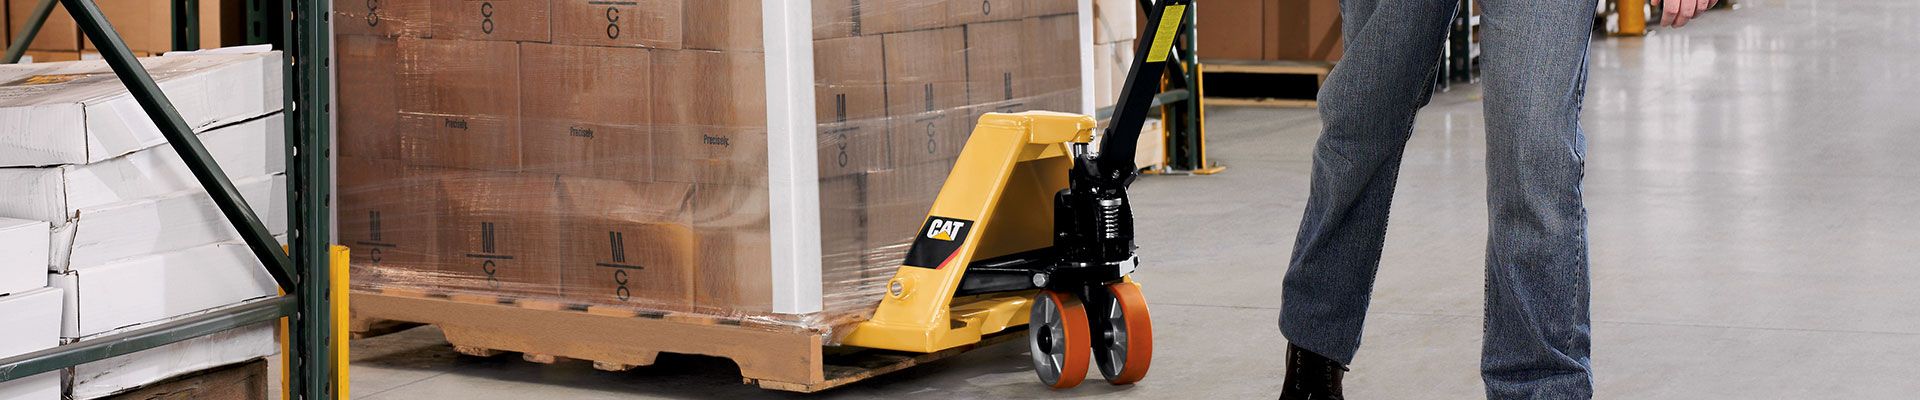 Manual pallet jack being used in a warehouse